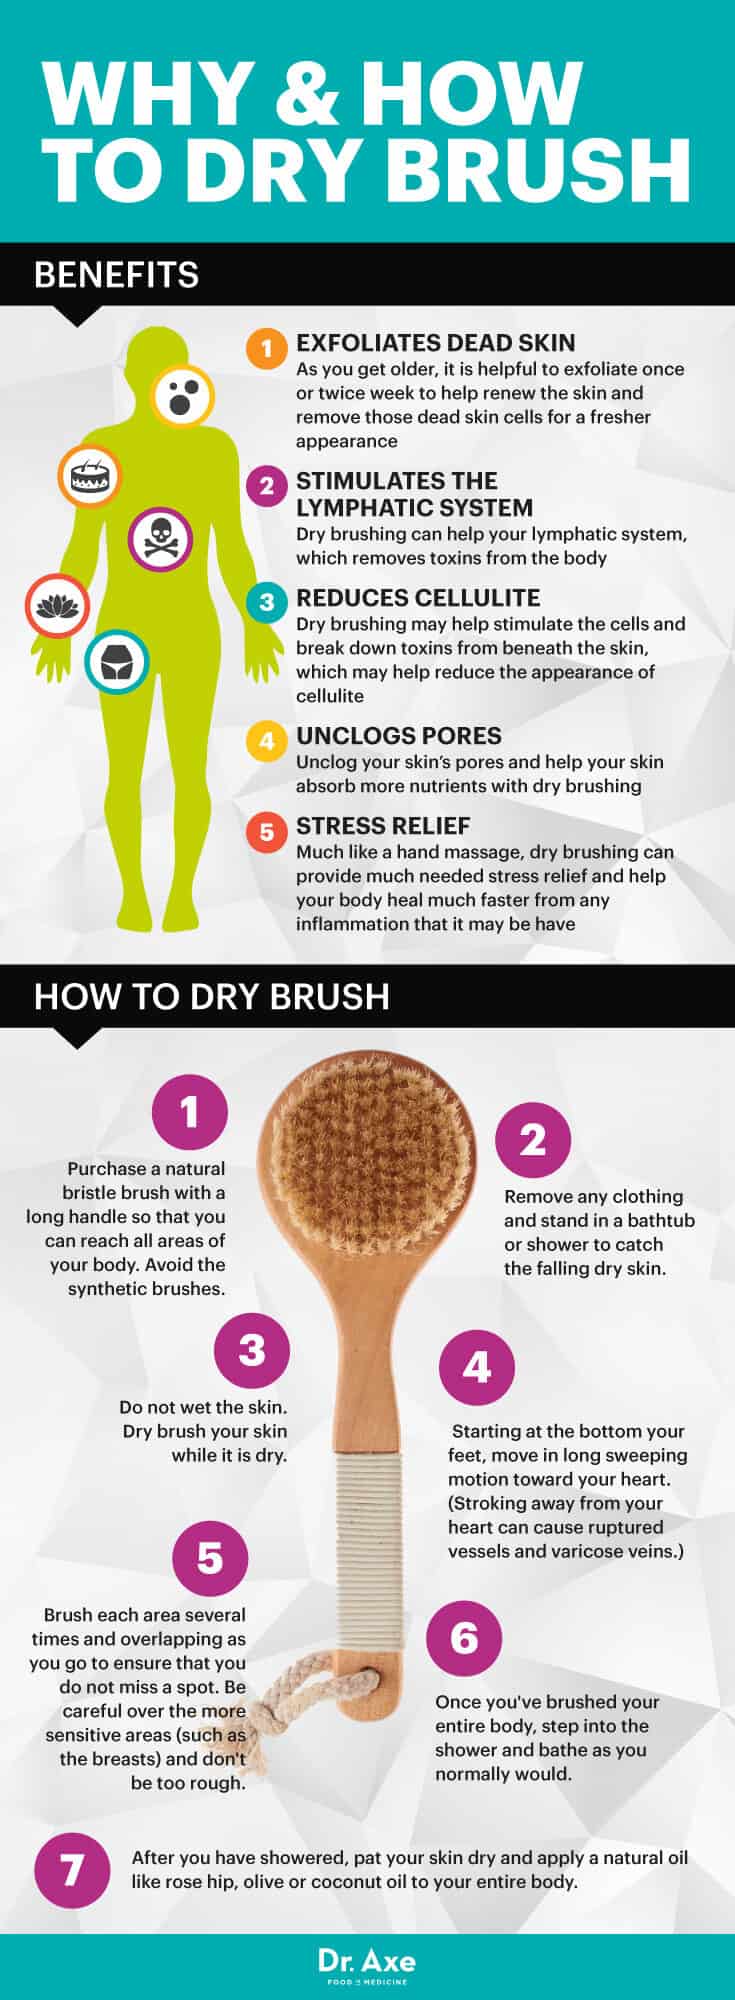 Dry brushing benefits - Dr. Axe